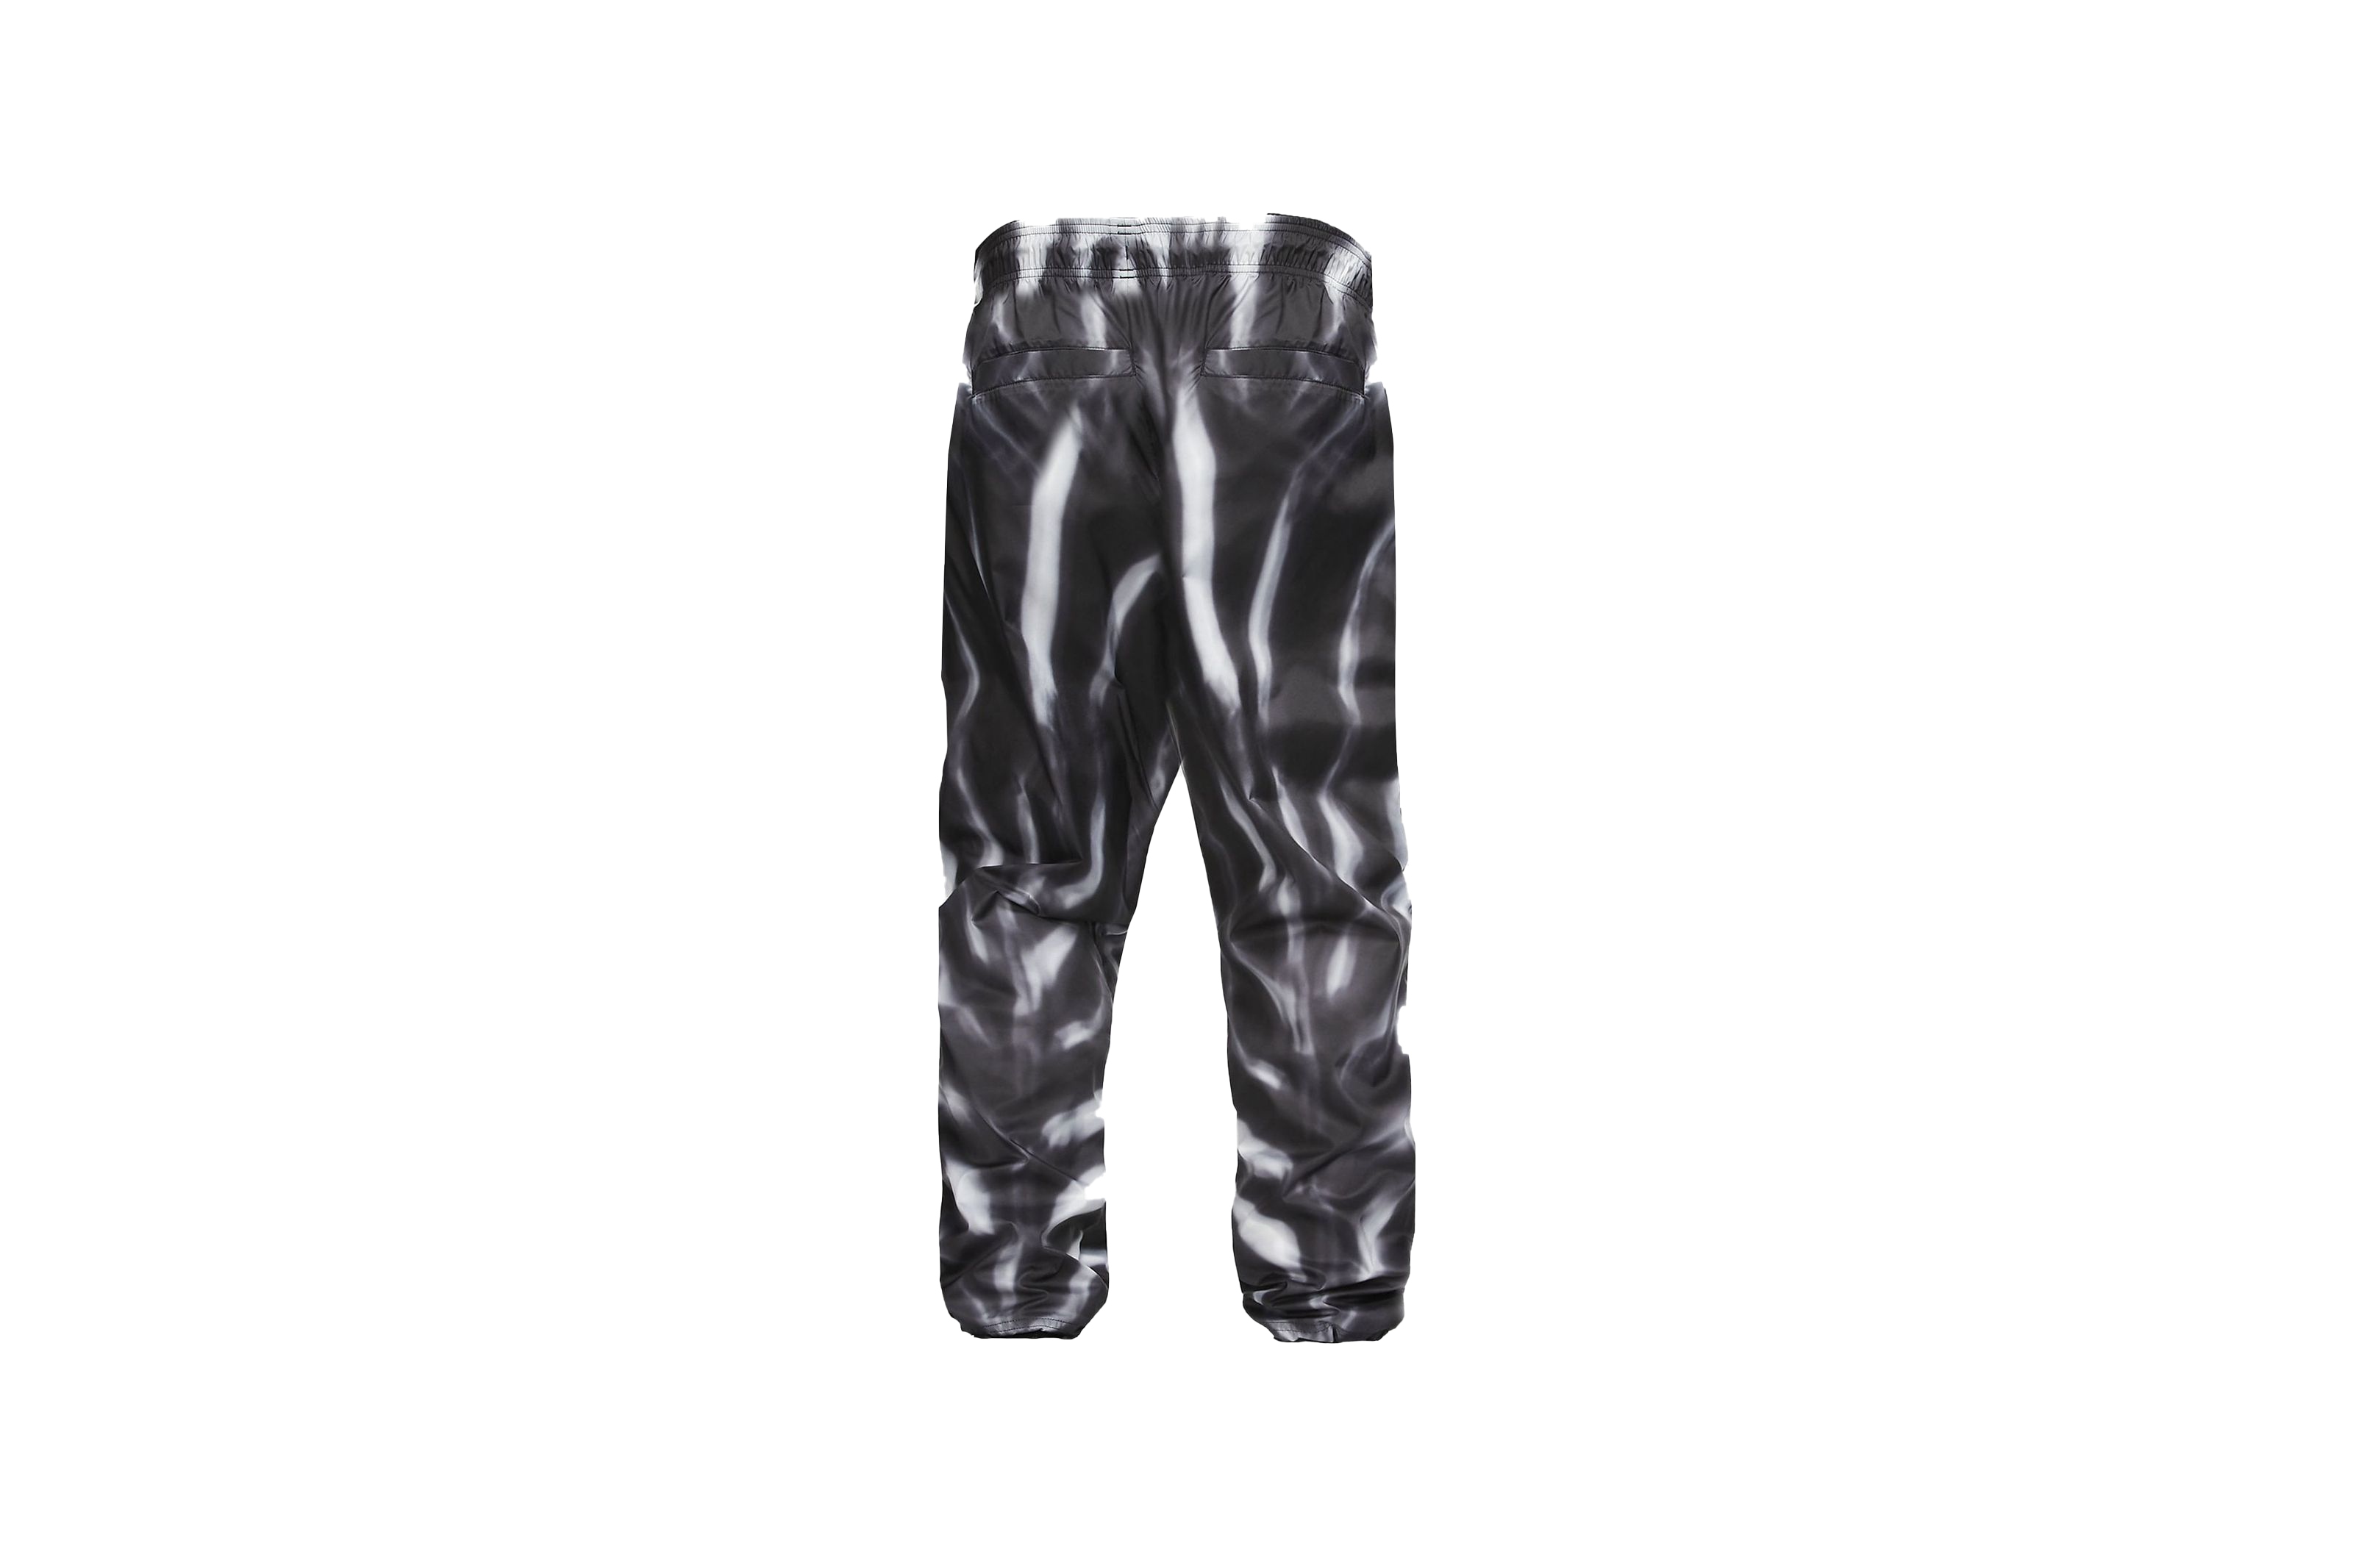 FEAR OF GOD x Nike All Over Print Pants 